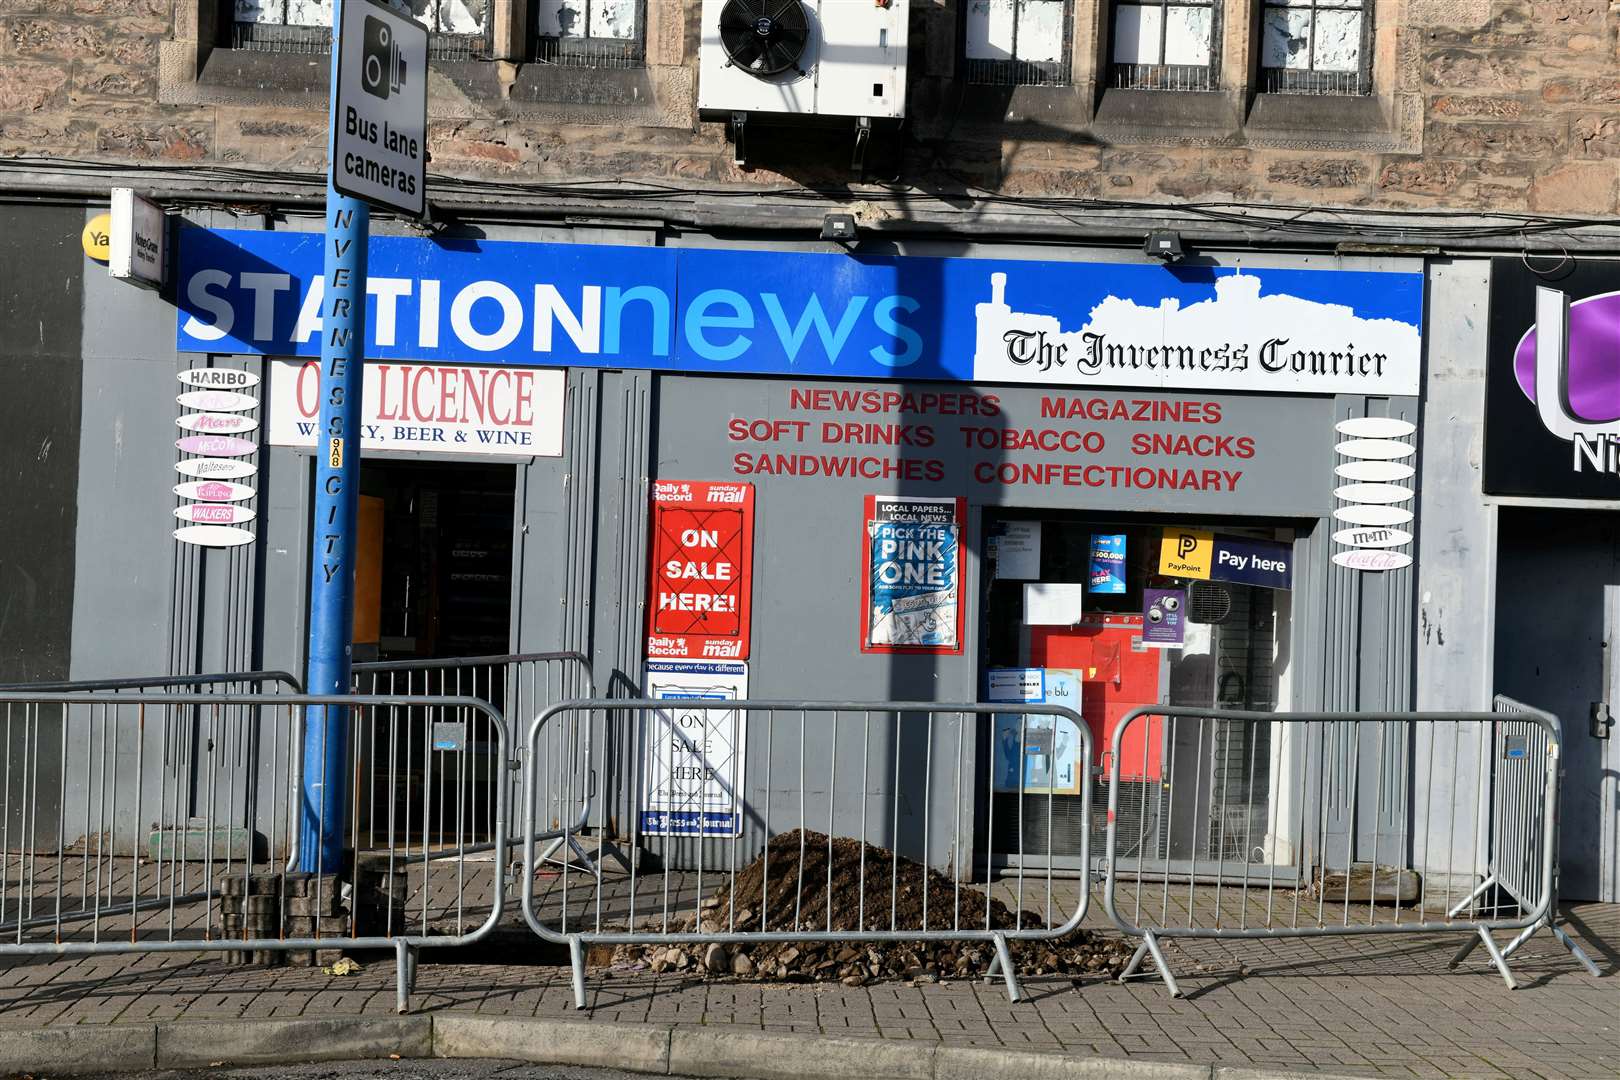 A member of staff was assaulted at the former newsagent's at Inverness bus station.